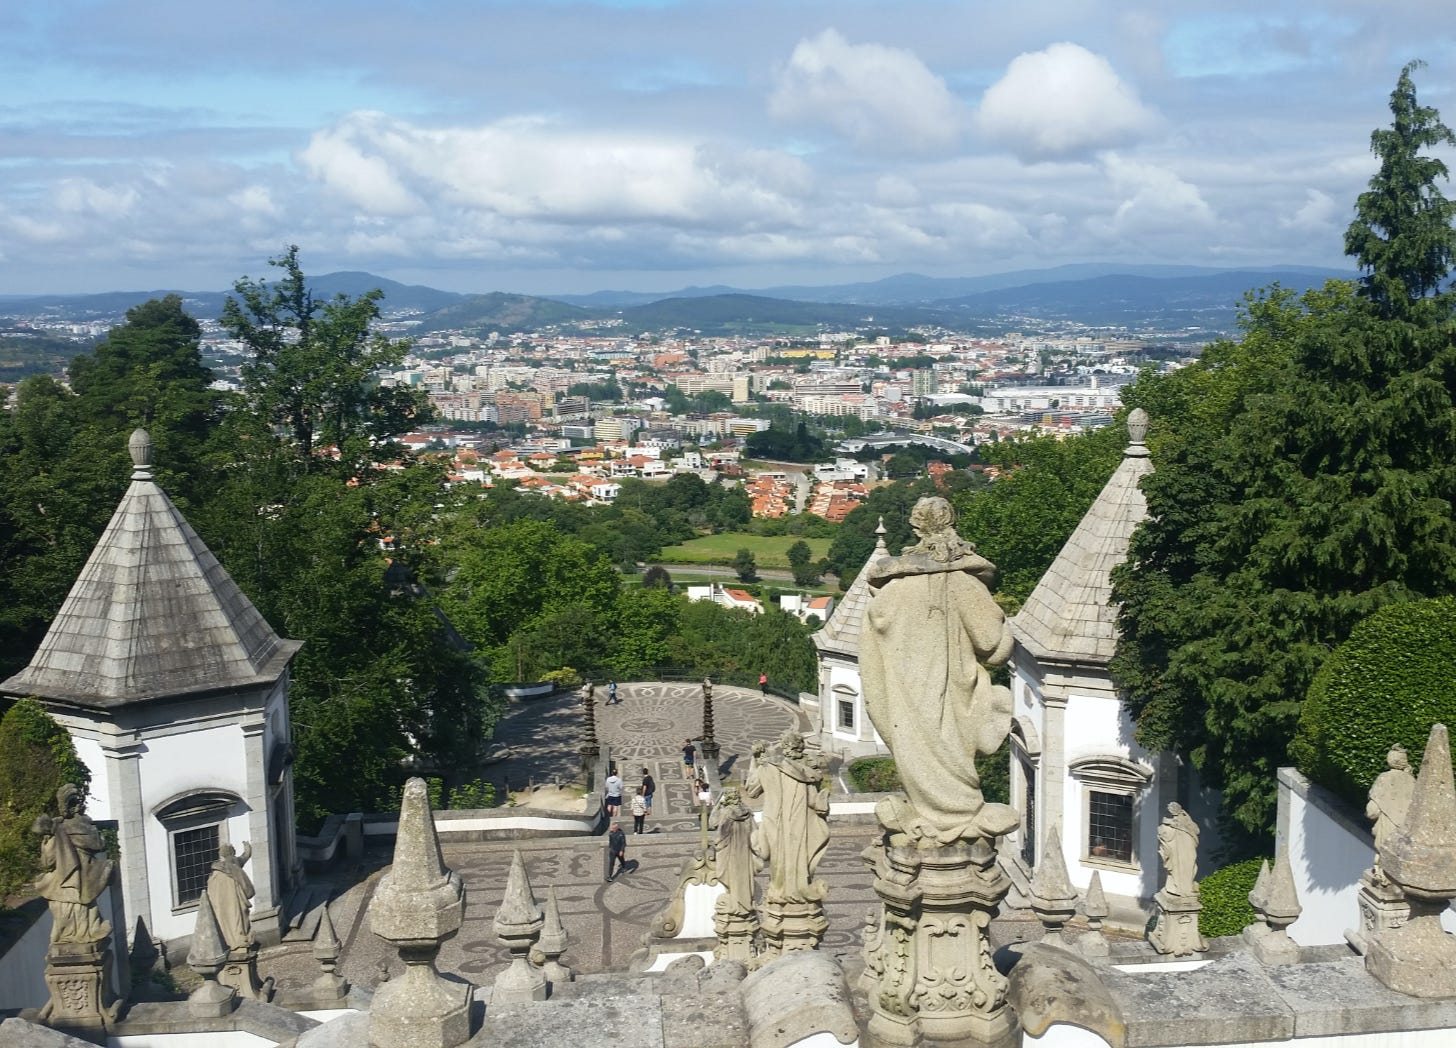 View from the steps of Bom Jesus do Monte